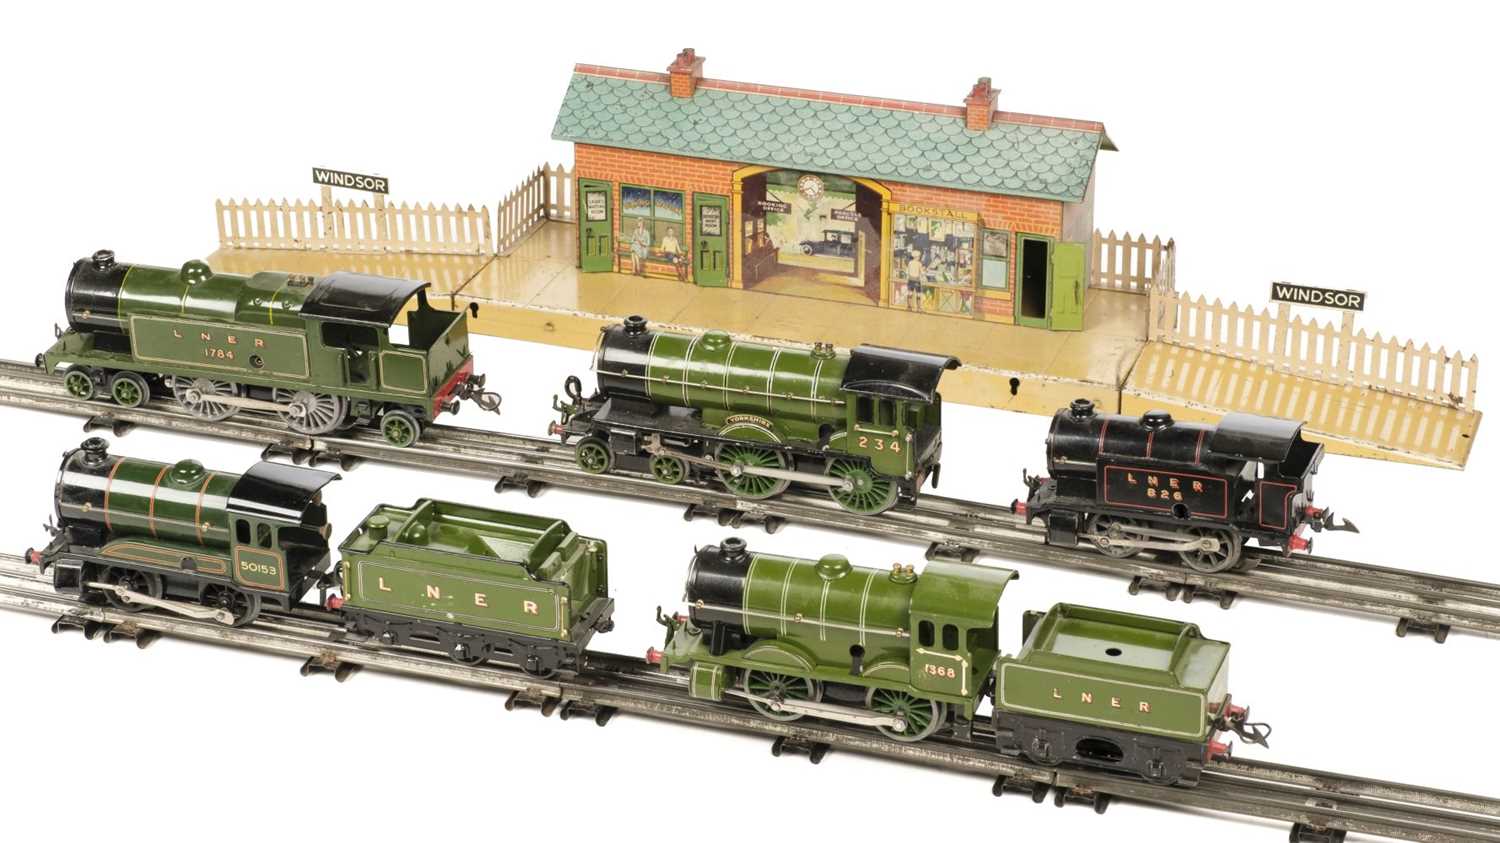 Lot 254 - Model Rail. A collection of Hornby Series railway locomotives and model rail circa 1950s